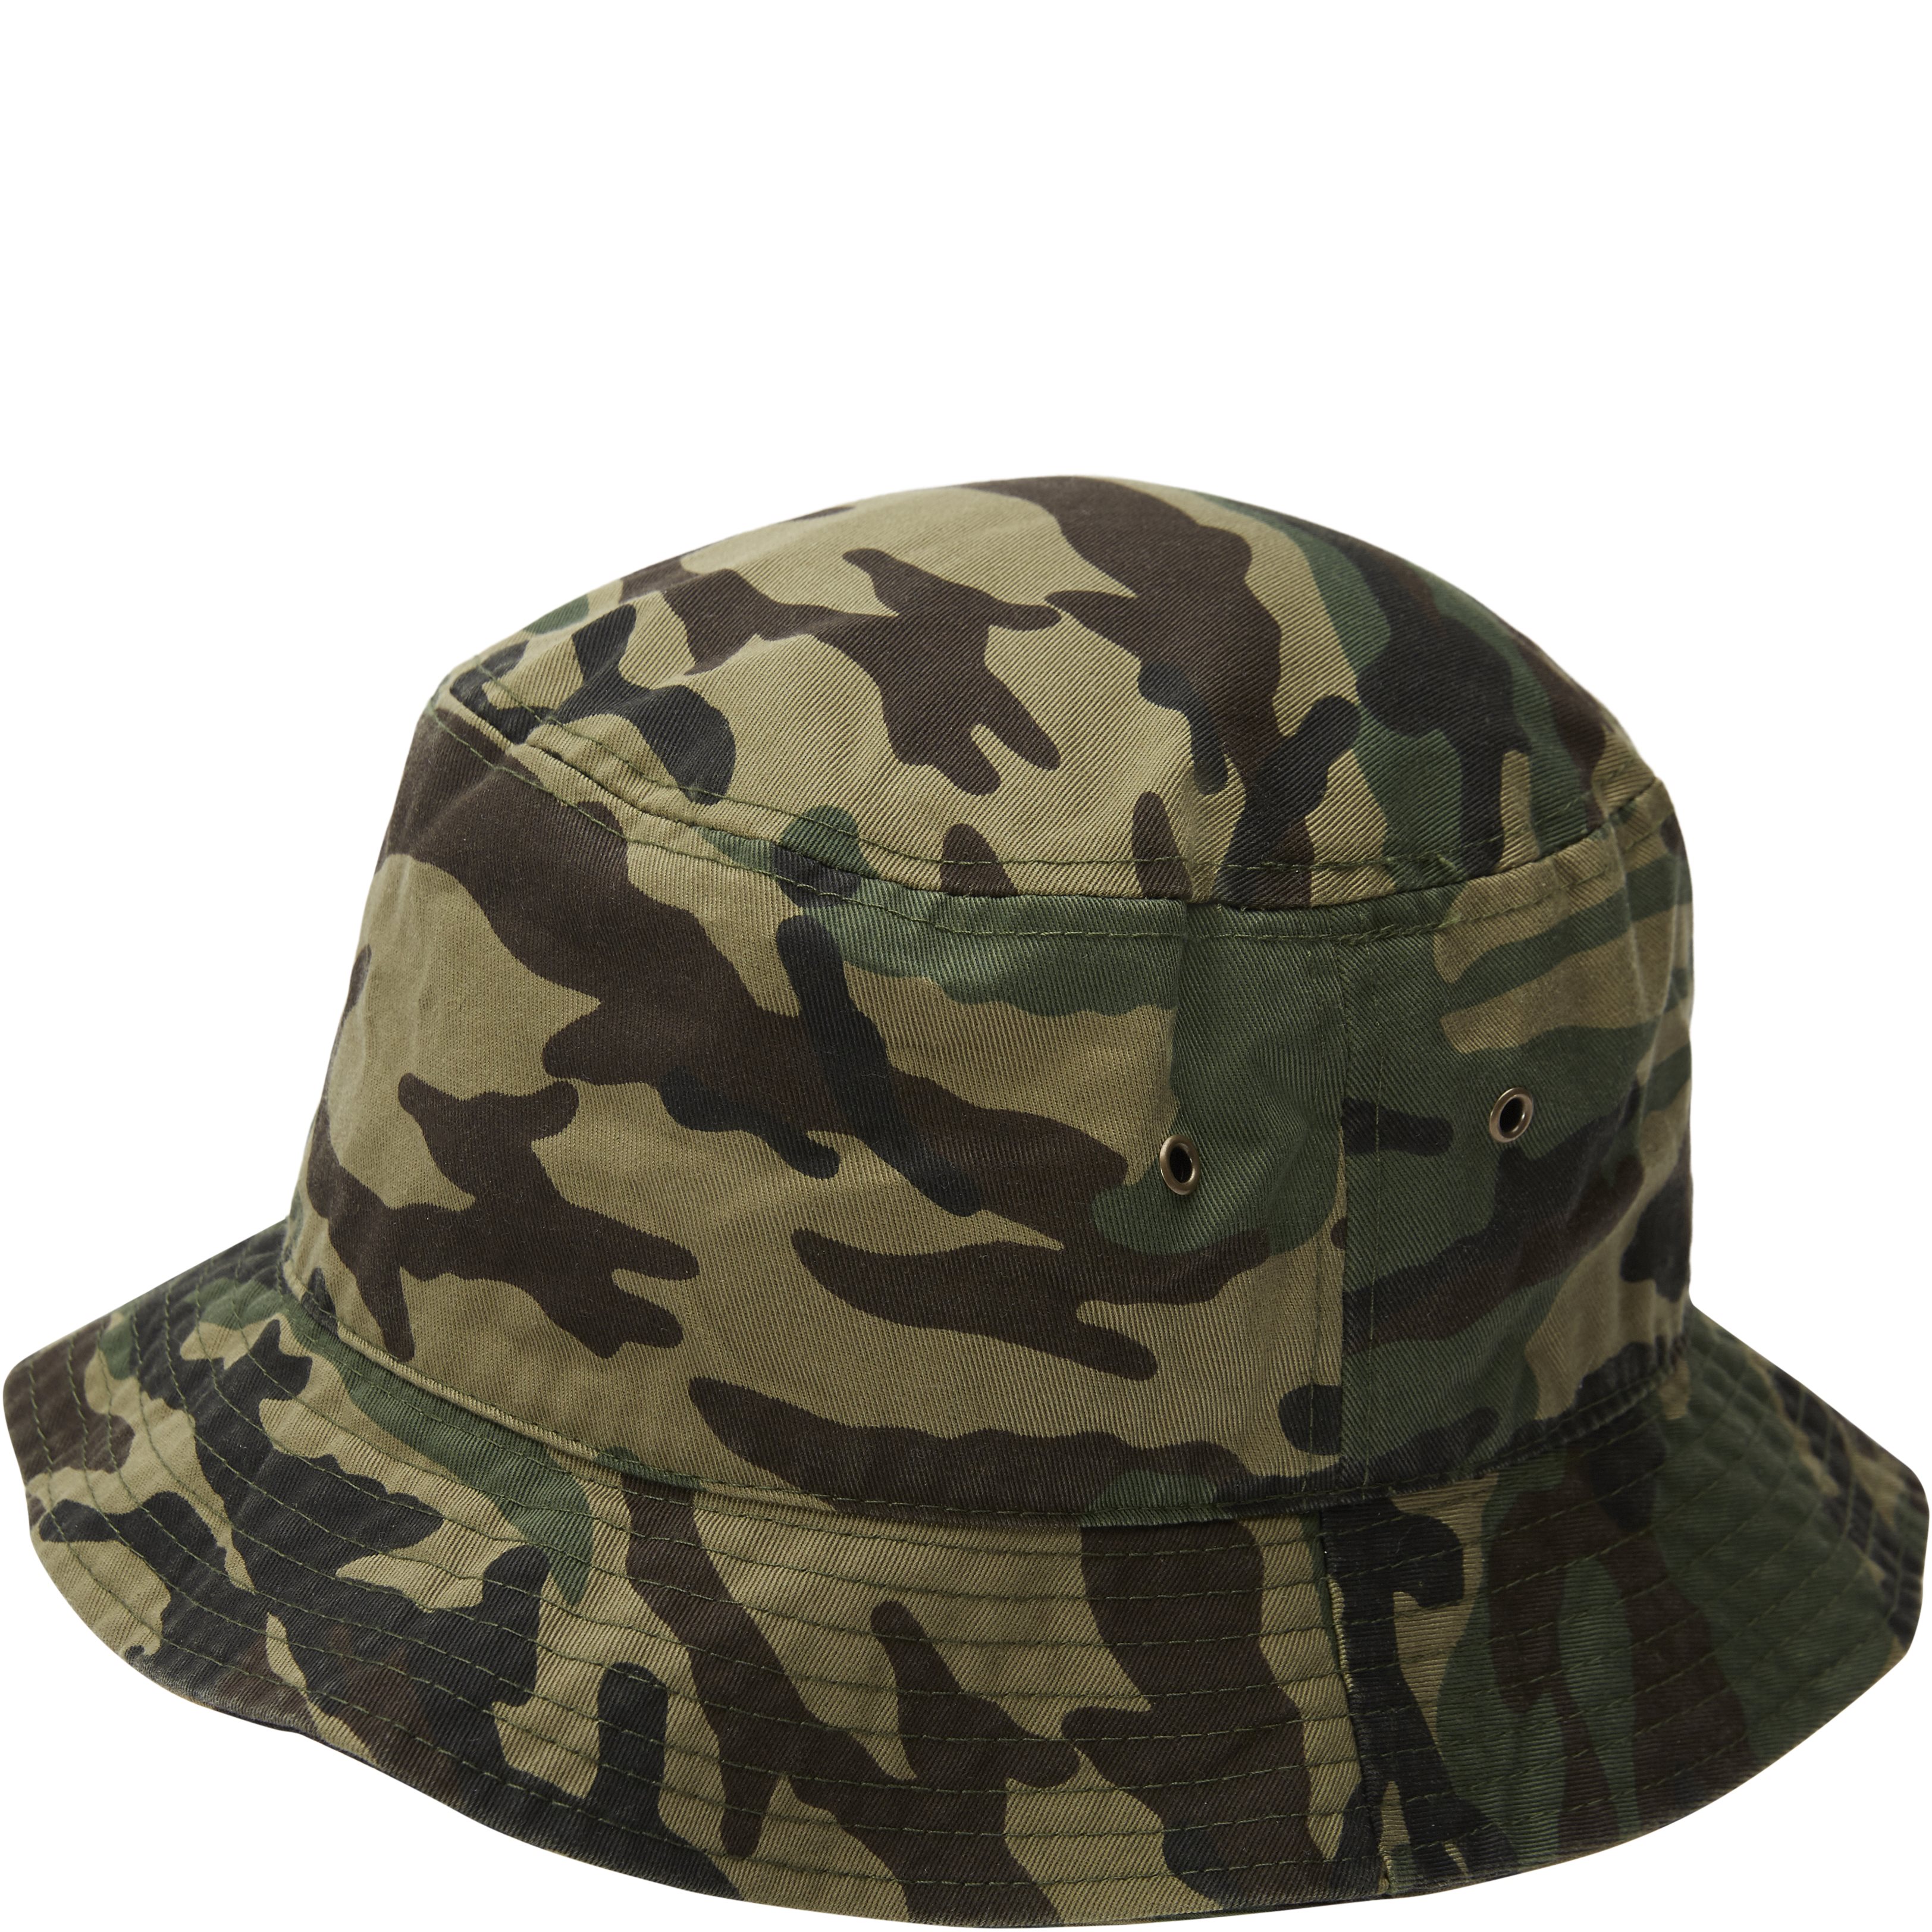 qUINT Hatte BUCKET 500 Army